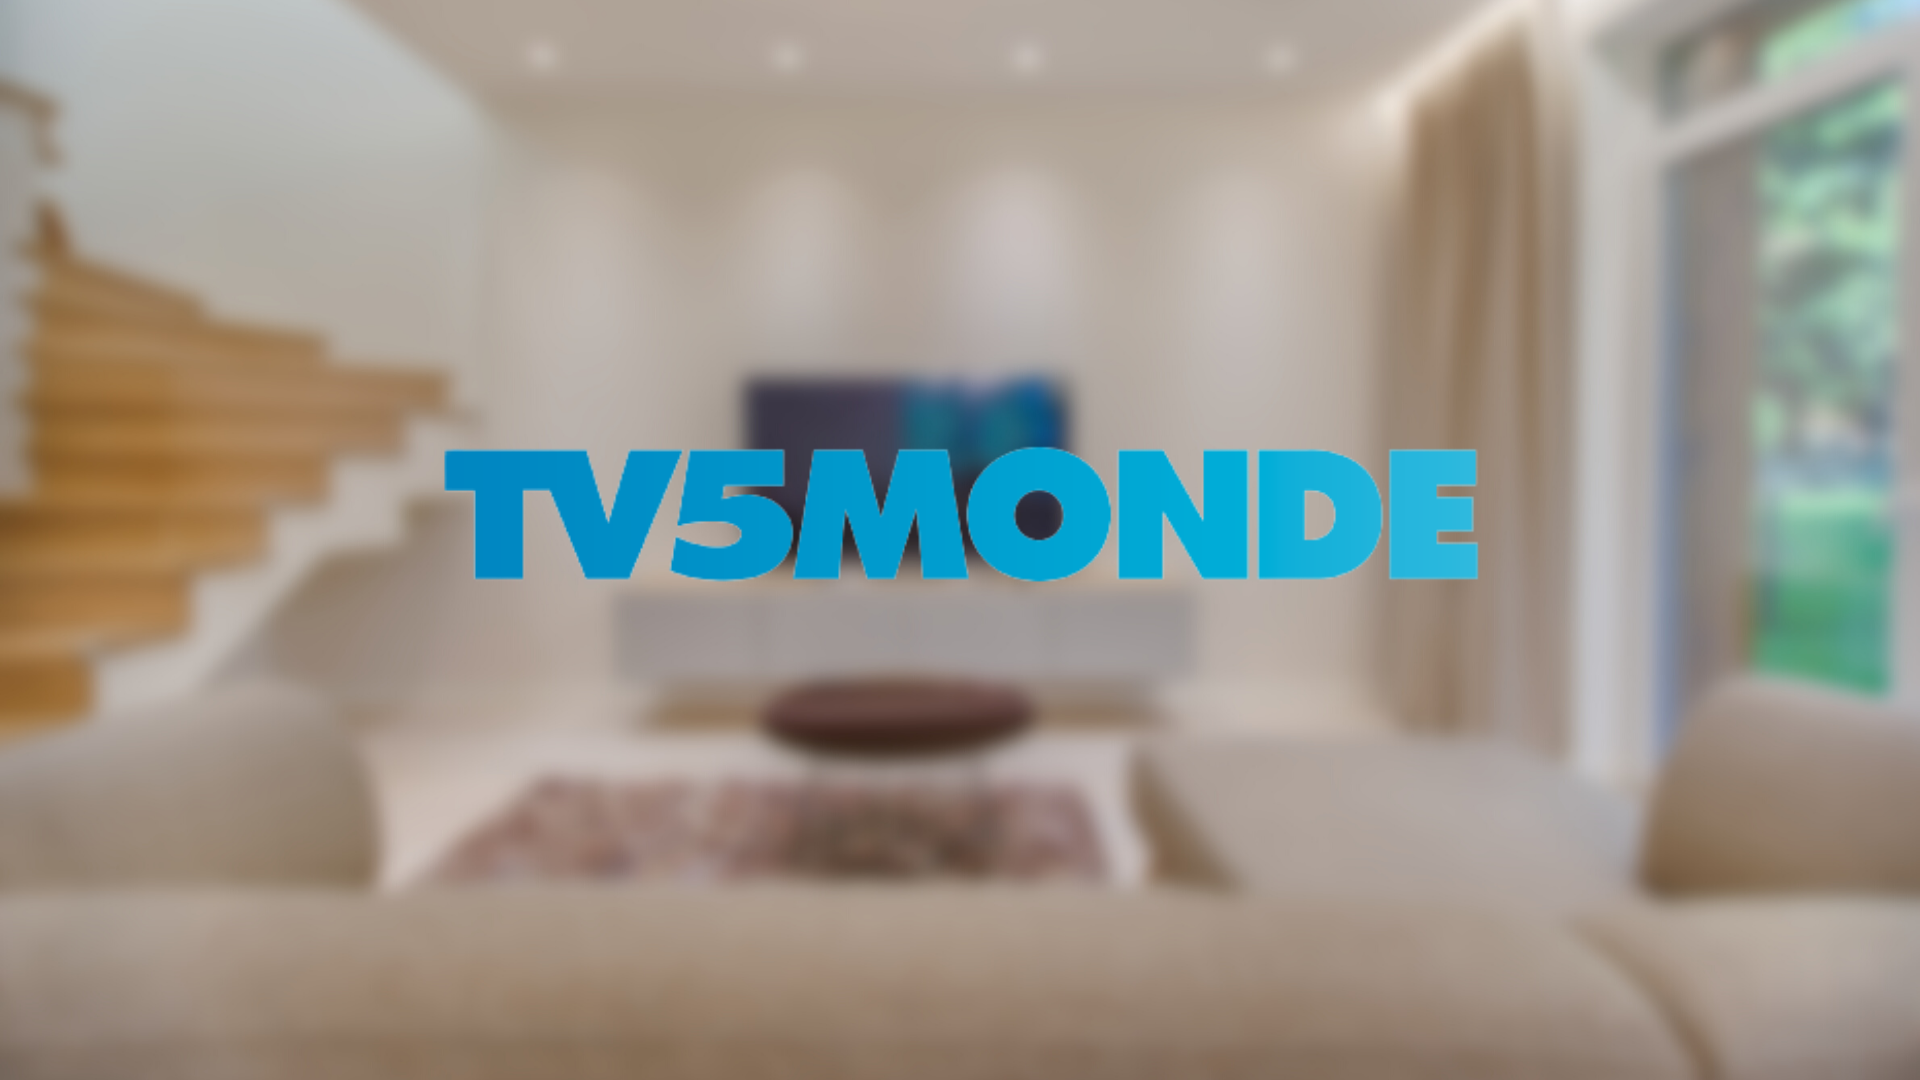 Switzerland gives the green light for Monaco to join TV5 Monde